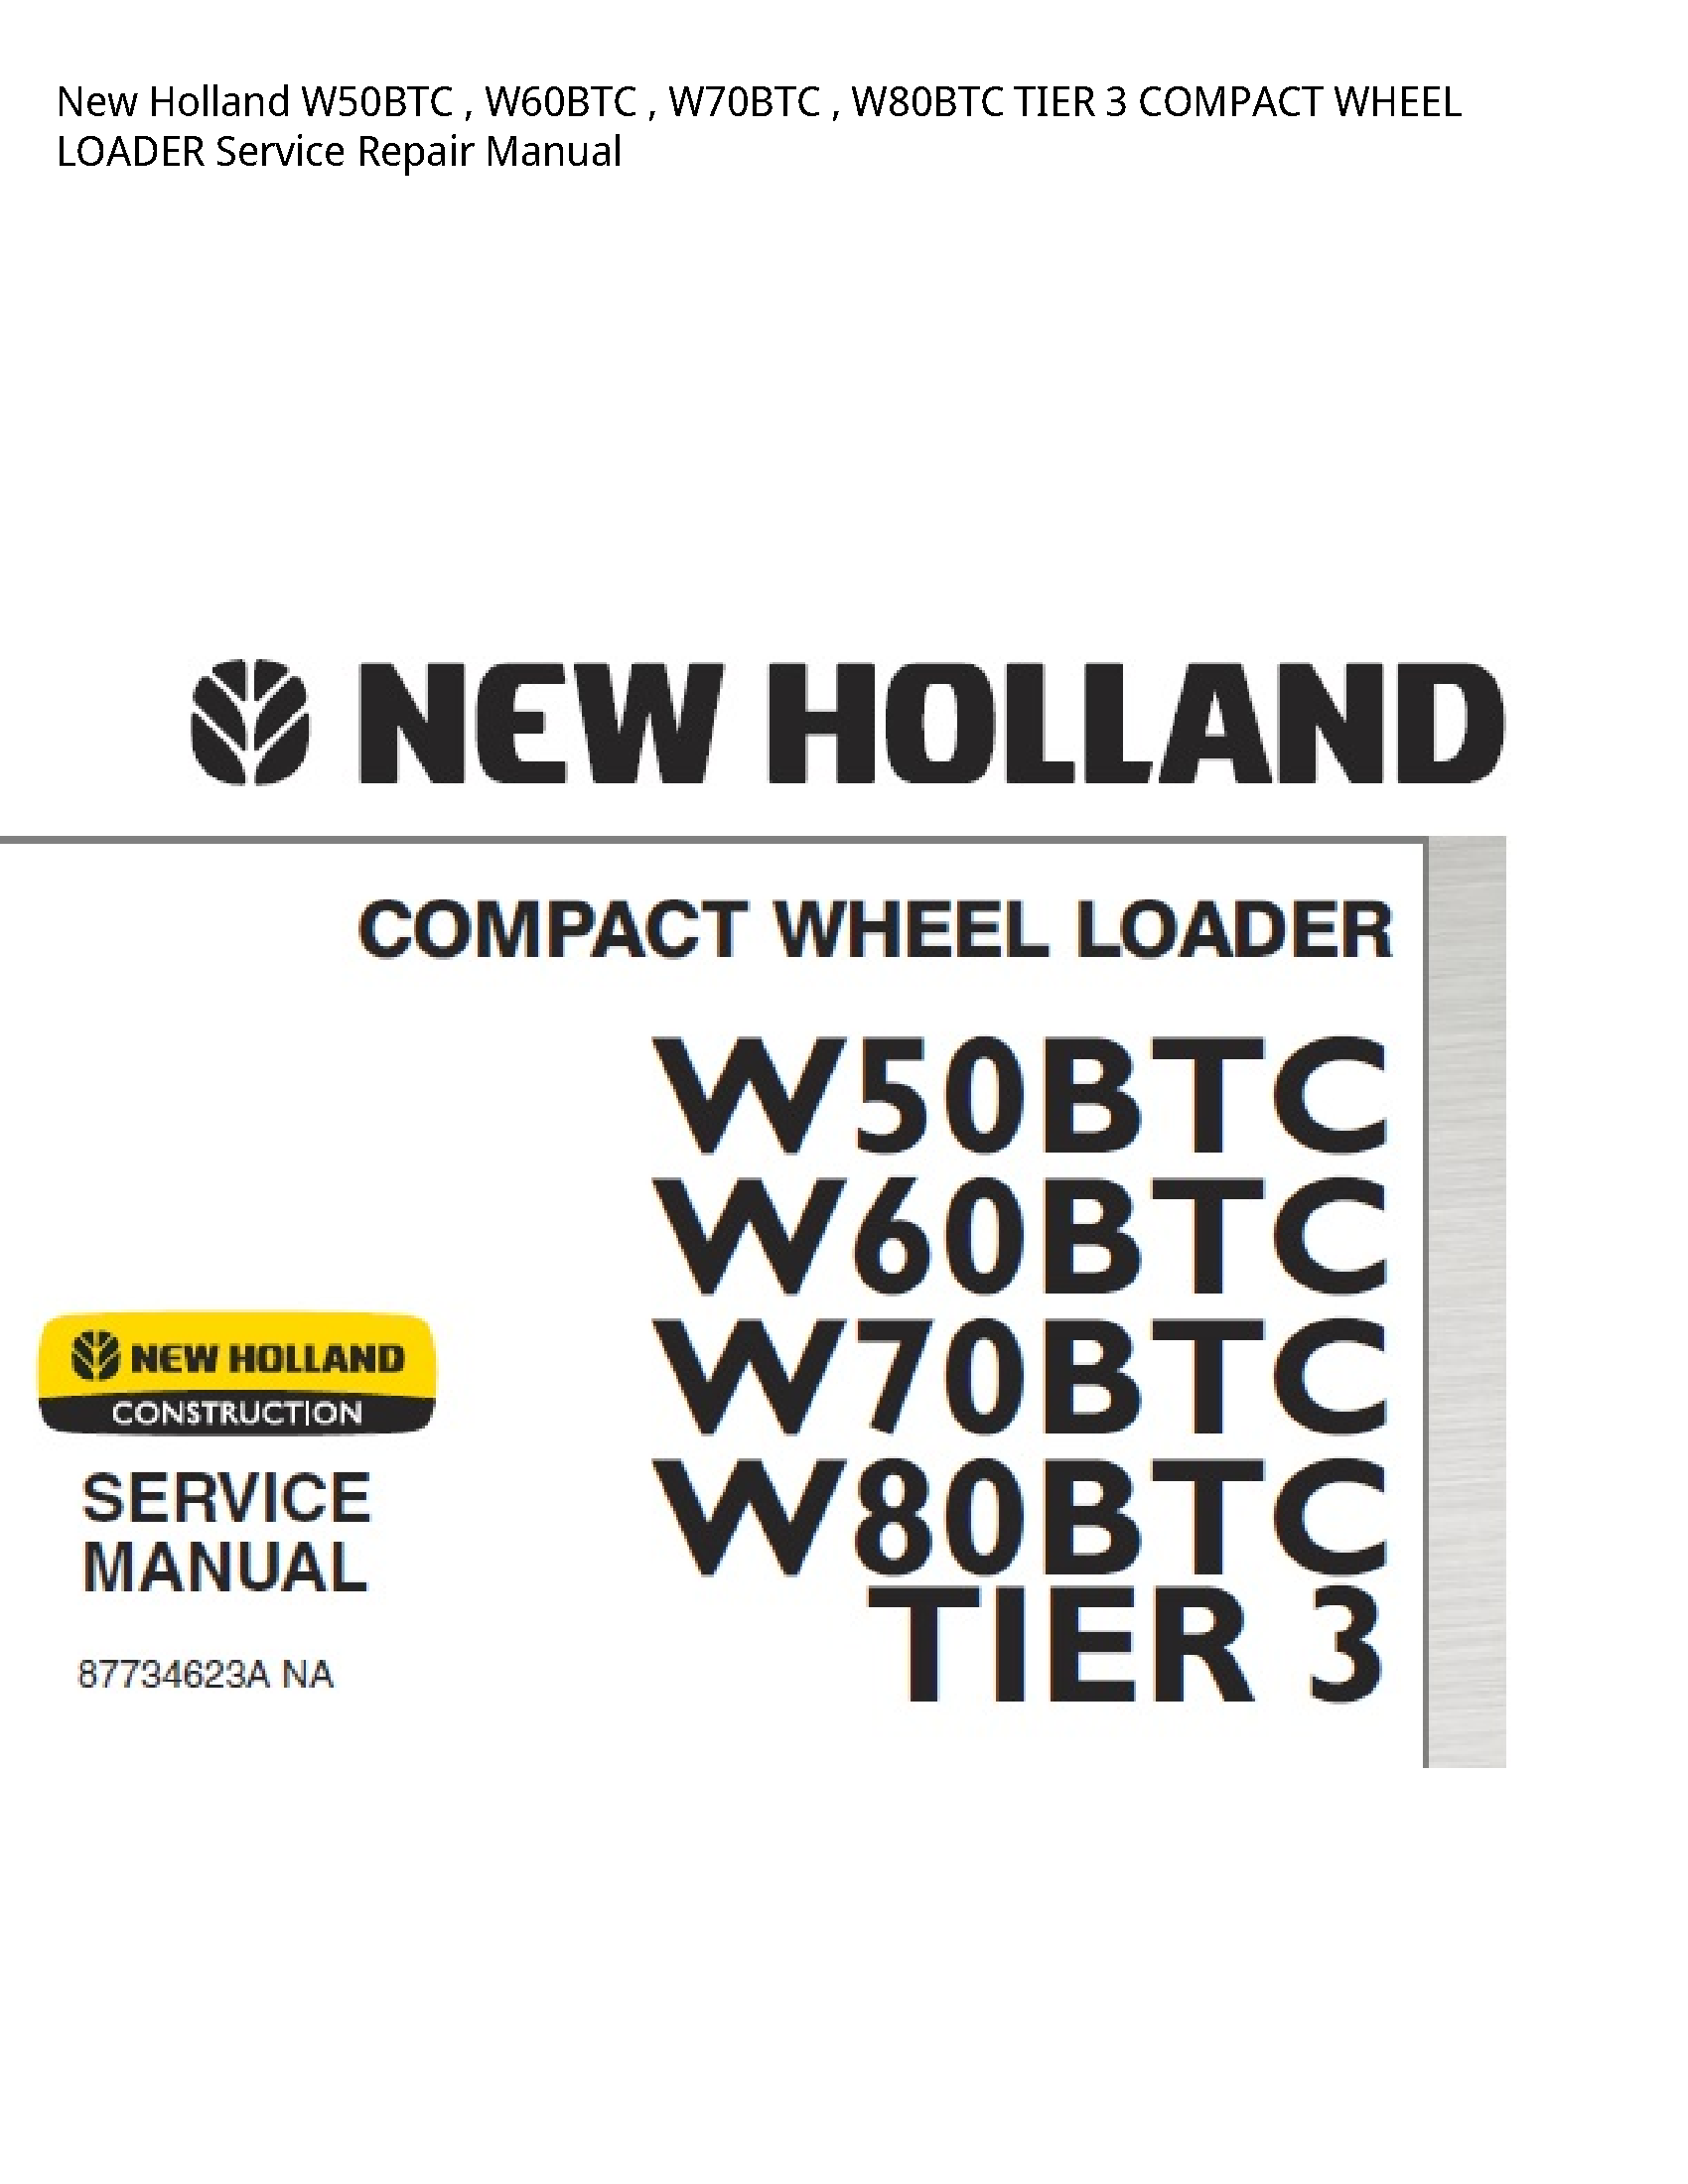 New Holland W50BTC TIER COMPACT WHEEL LOADER manual